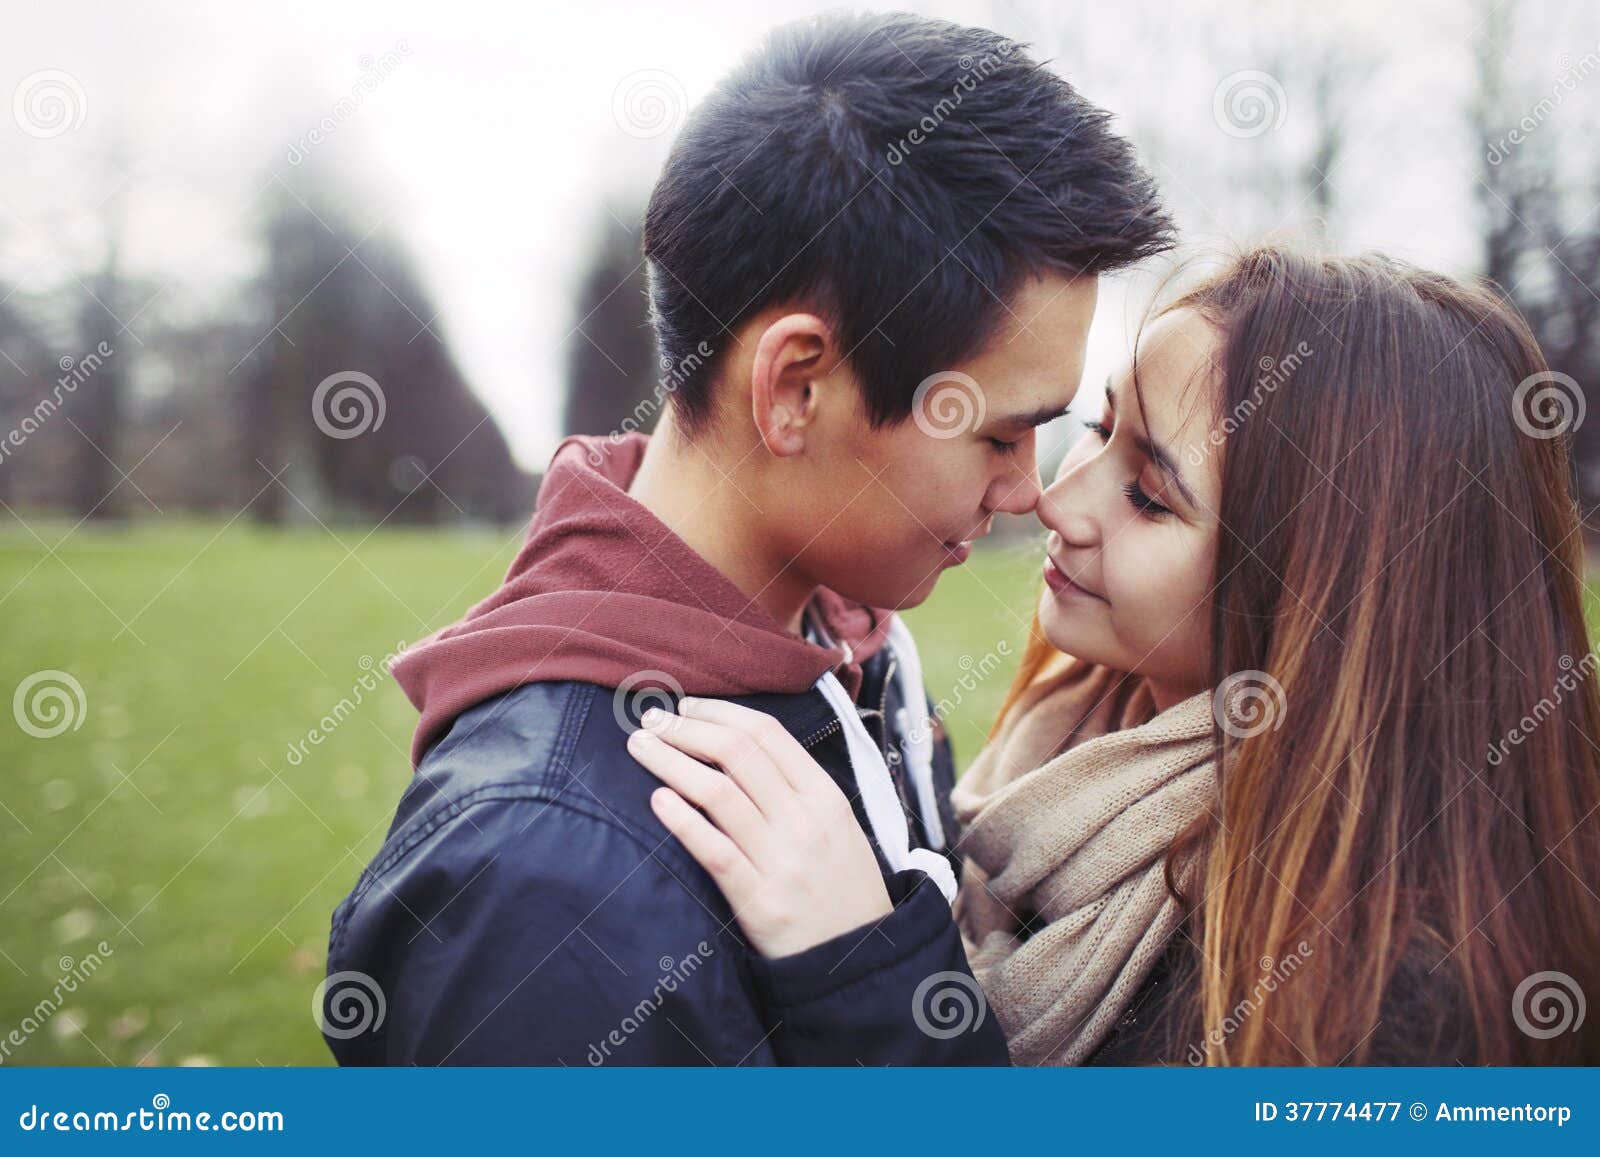 Teenage Couple Sharing A Romantic Moment Stock Image